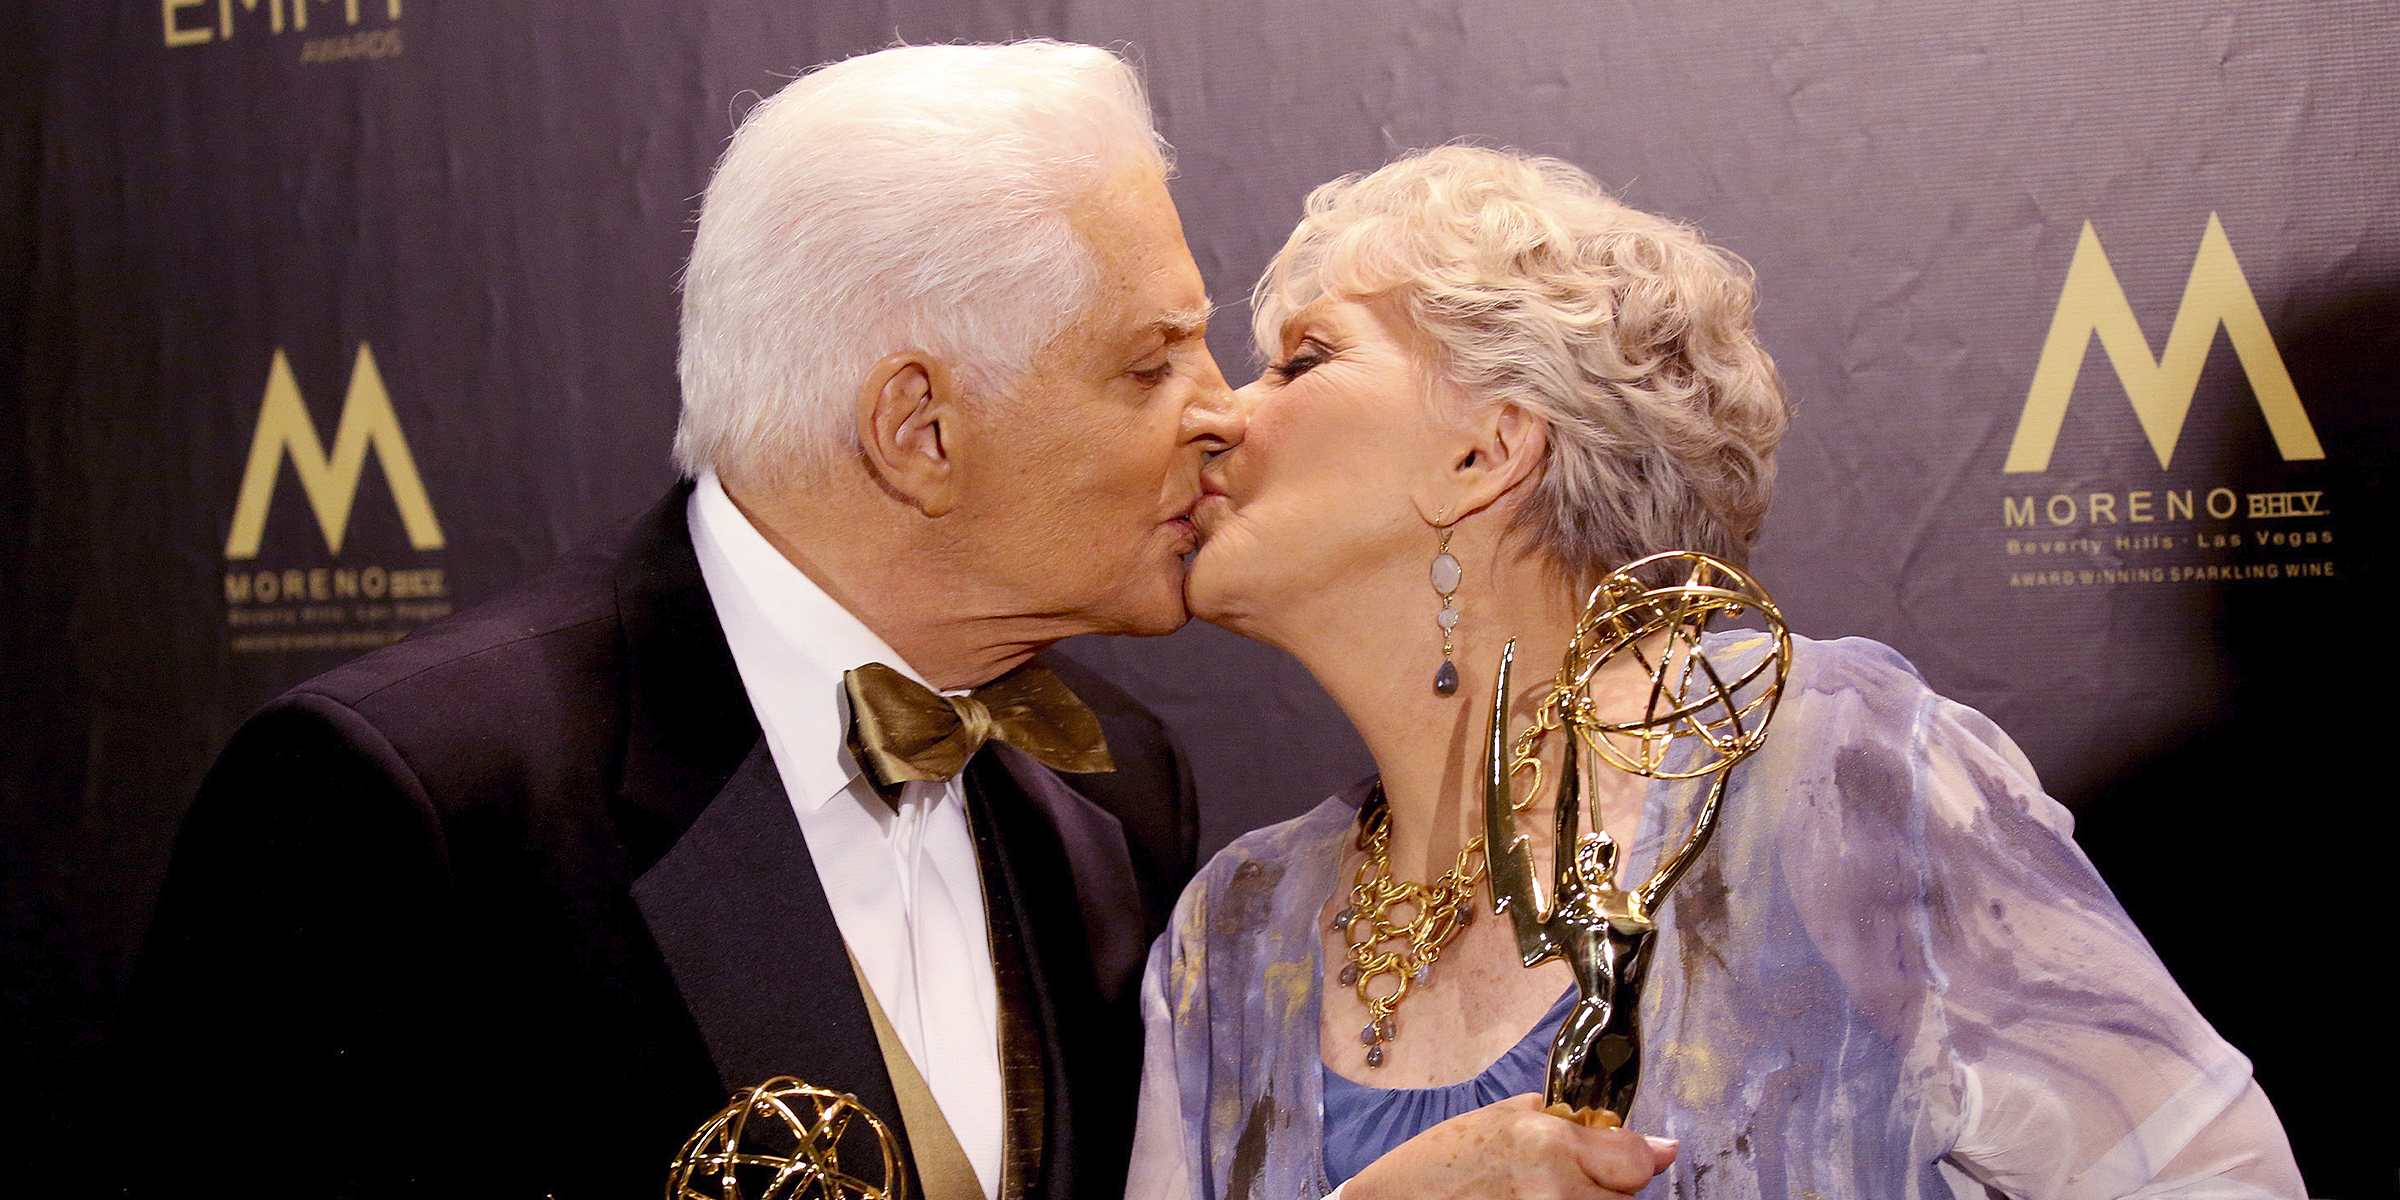 Bill Hayes and Susan Seaforth Hayes | Source: Getty Images